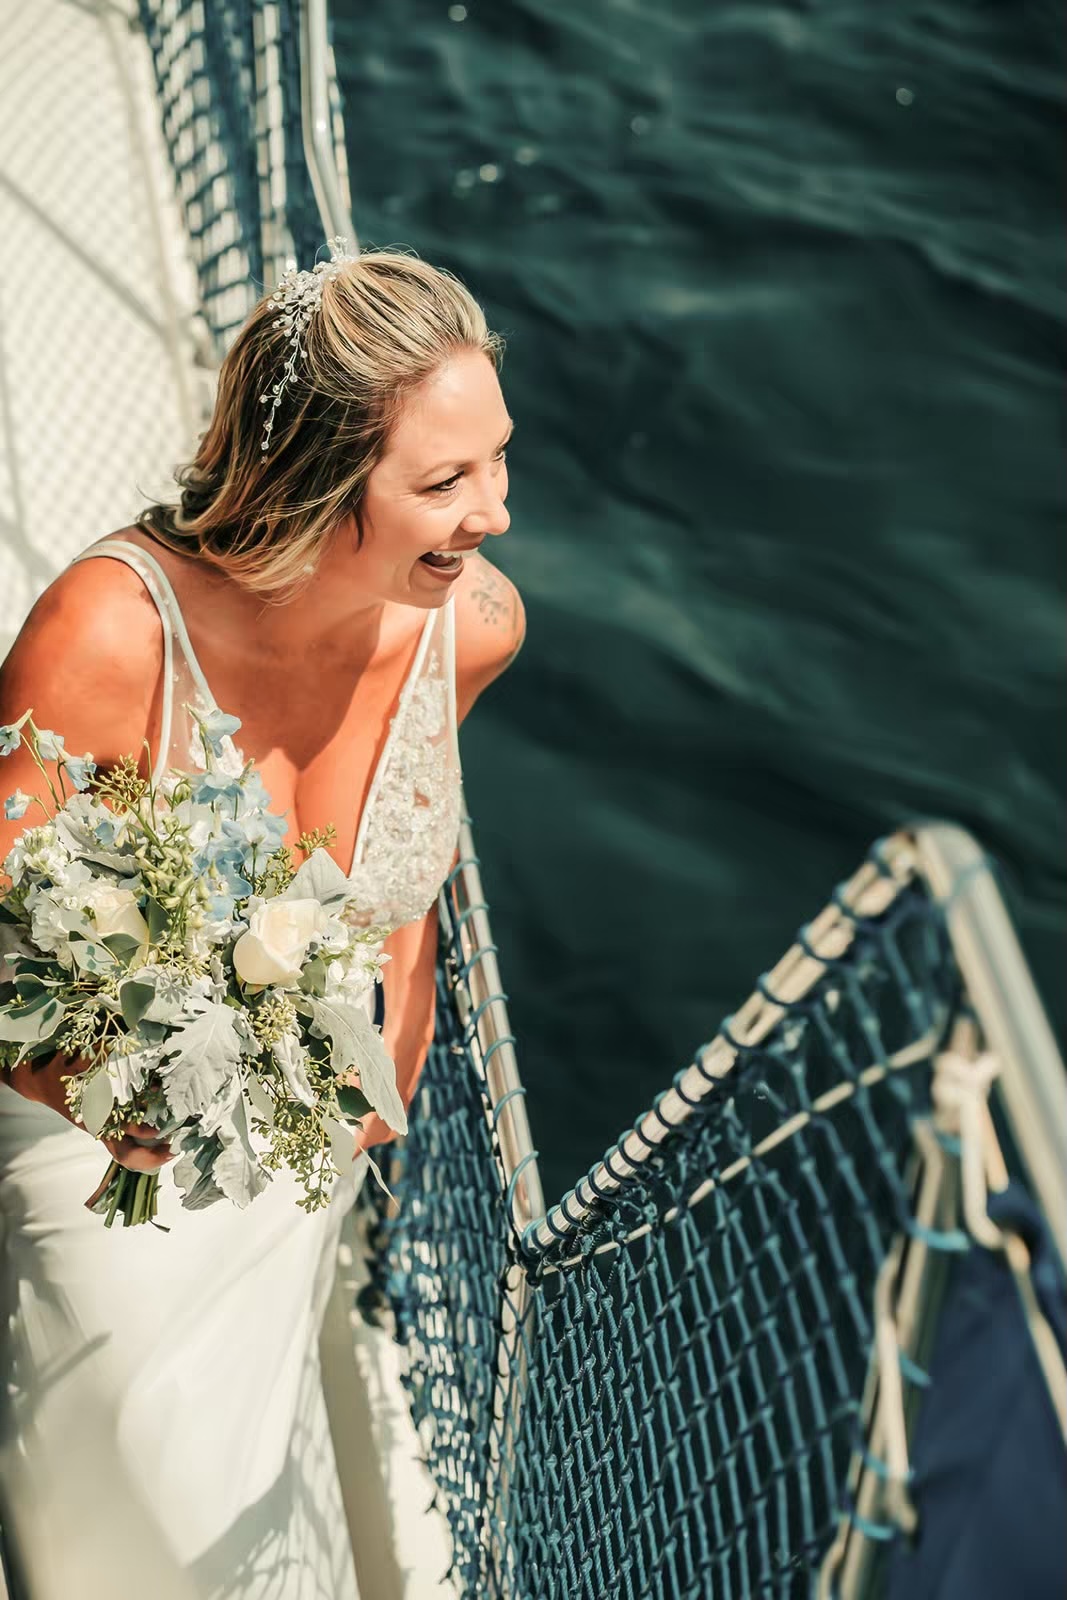 Bride makes her entrance at the Lake Tahoe boat wedding